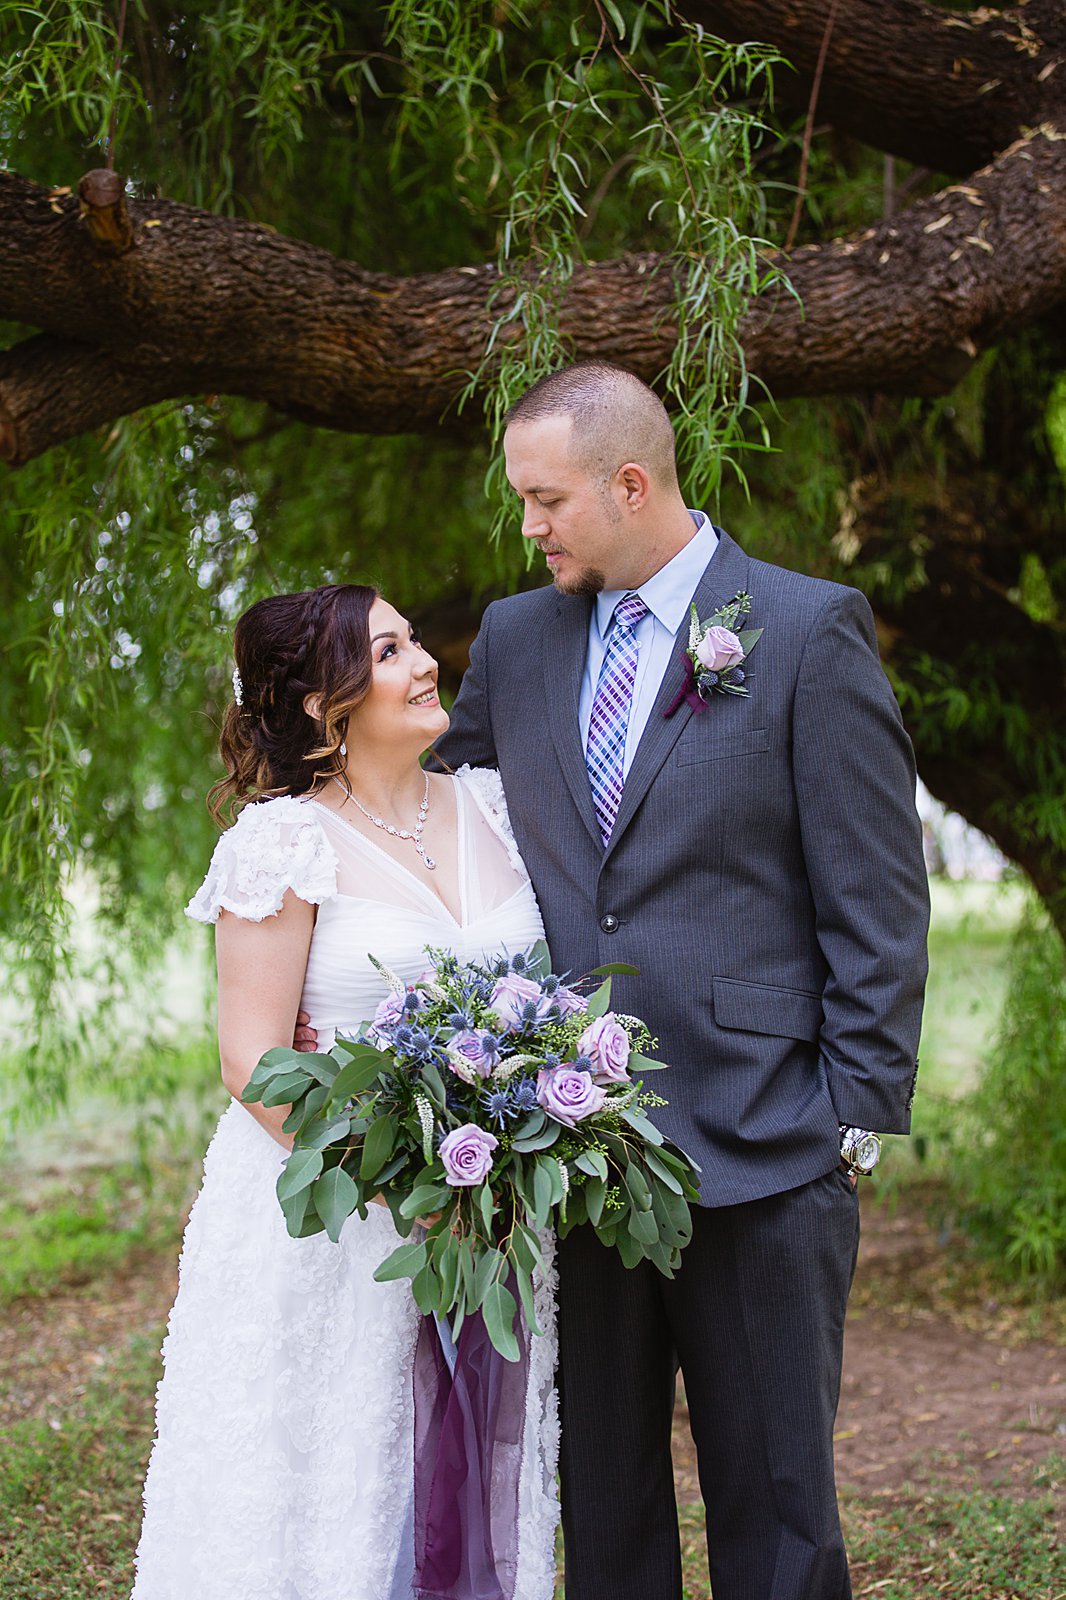 Bride and groom wearing purple and blue colors for their fall Phoenix wedding by PMA Photography.